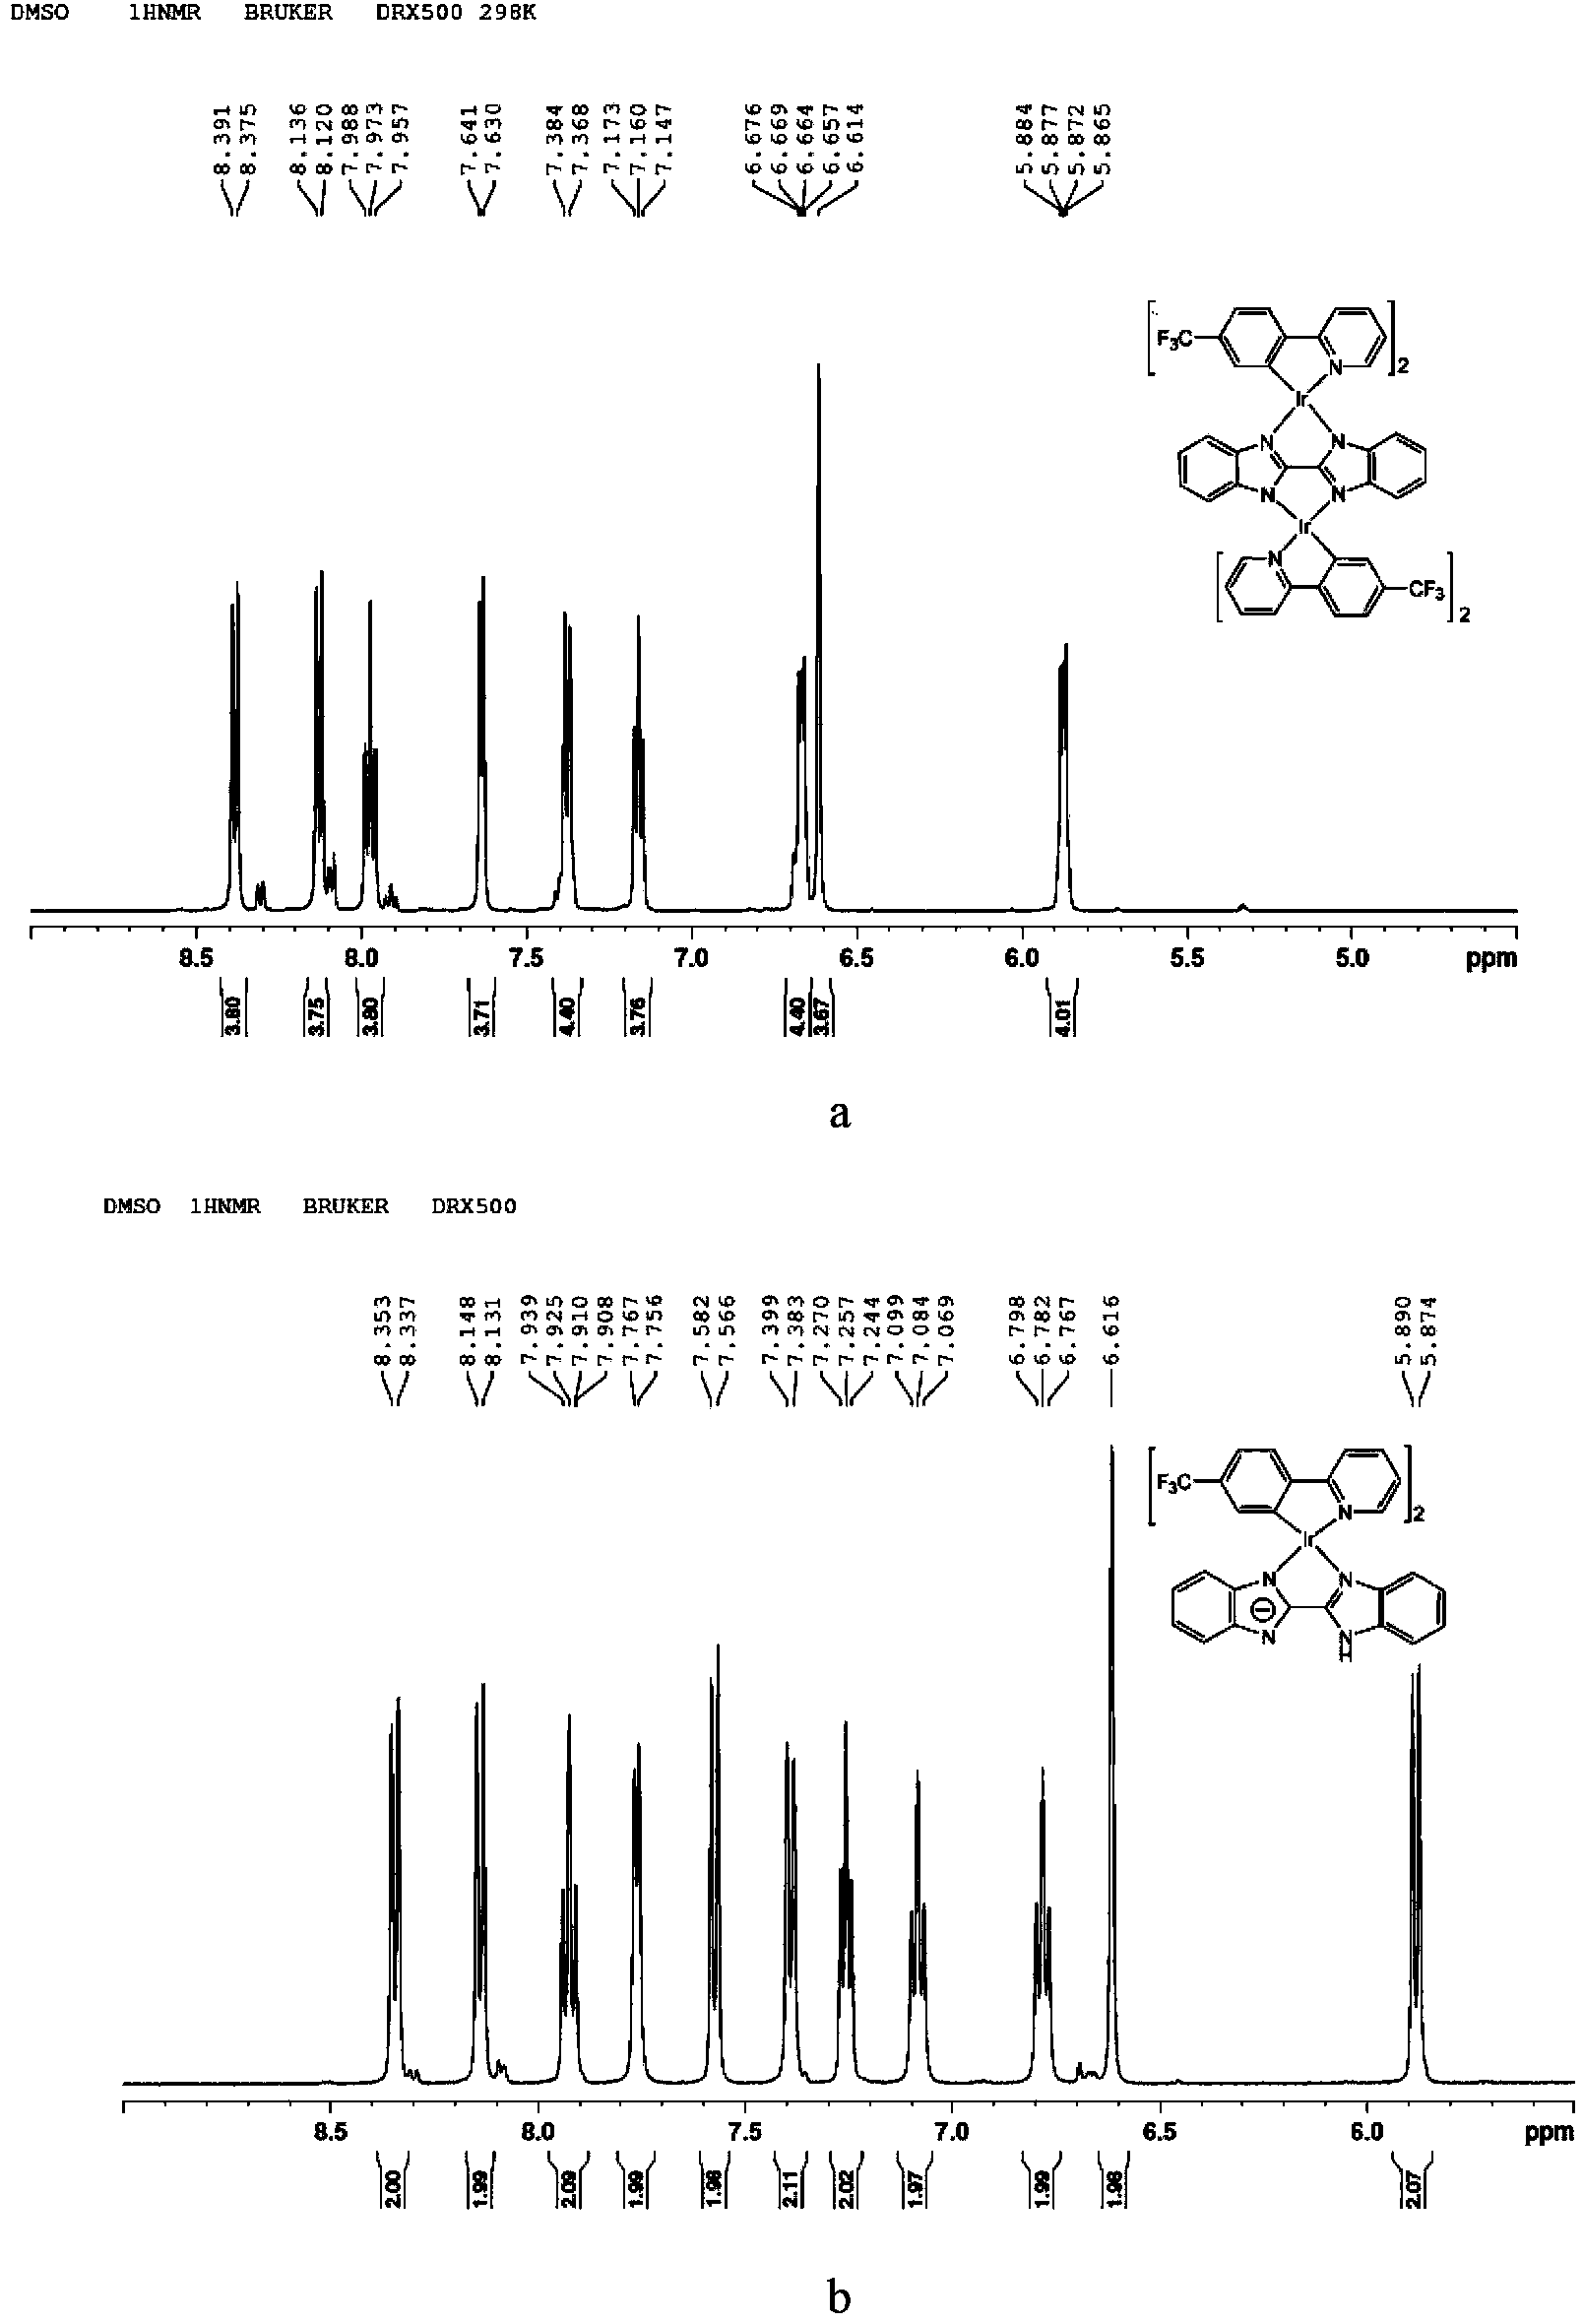 Ring metal iridium photosensitizers, synthesis thereof and application thereof in hydrogen preparation by photocatalytic reduction of water